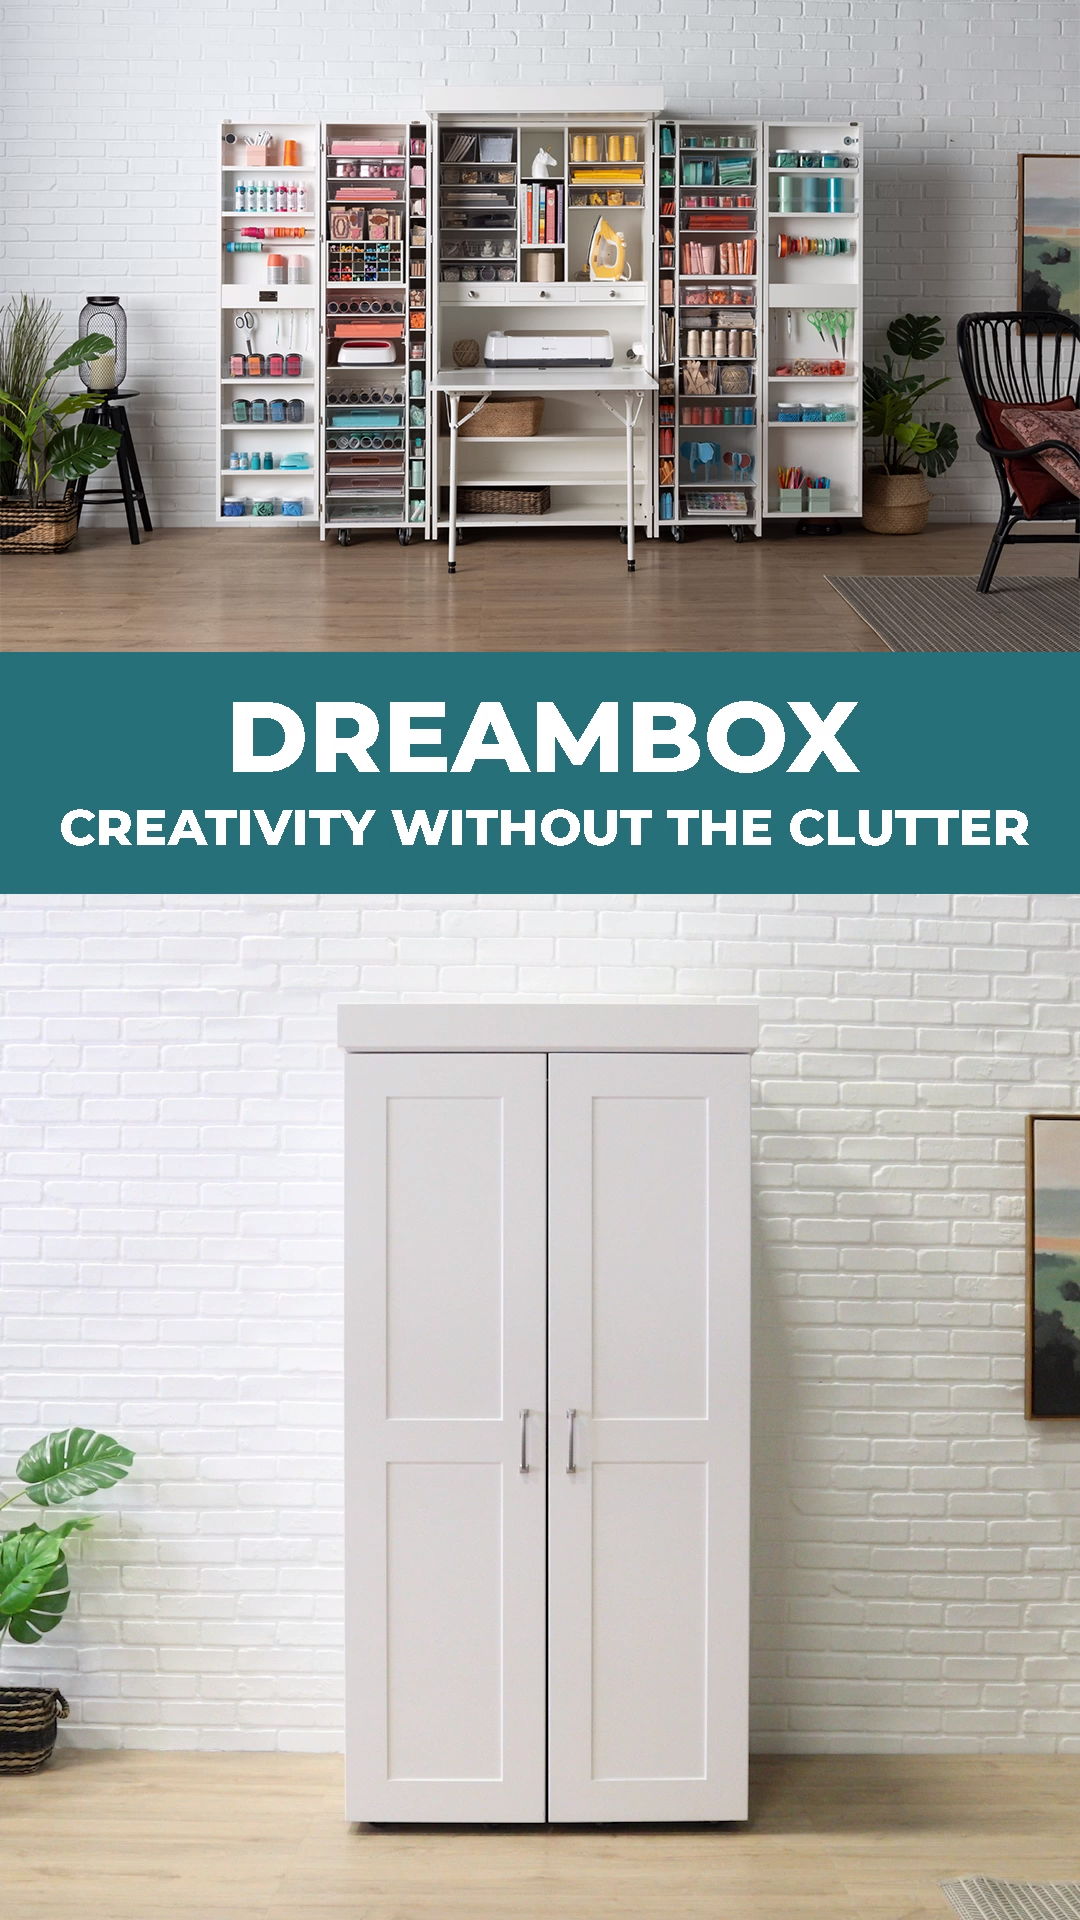 DreamBox: Creativity Without the Clutter - DreamBox: Creativity Without the Clutter -   18 diy Storage room ideas